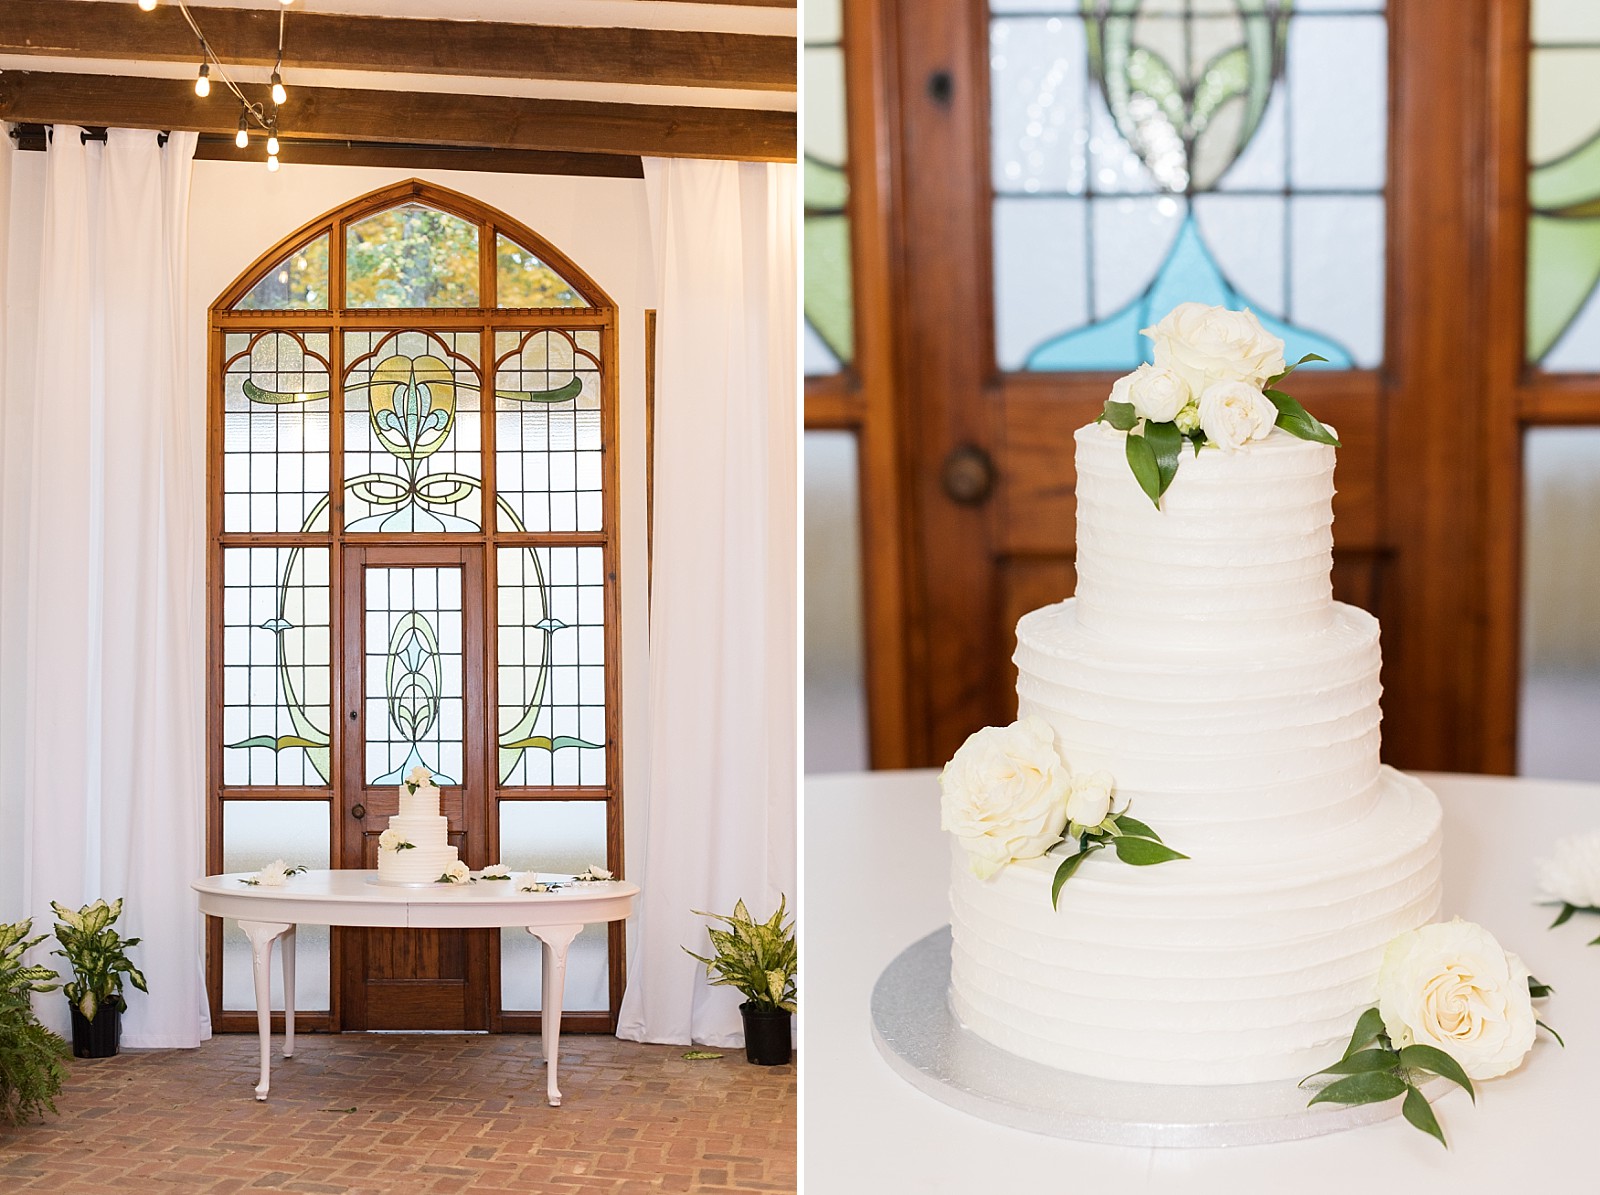 Cake in front of stained glass window and cake details  | The Meadows in Raleigh | Raleigh NC Wedding Photographer